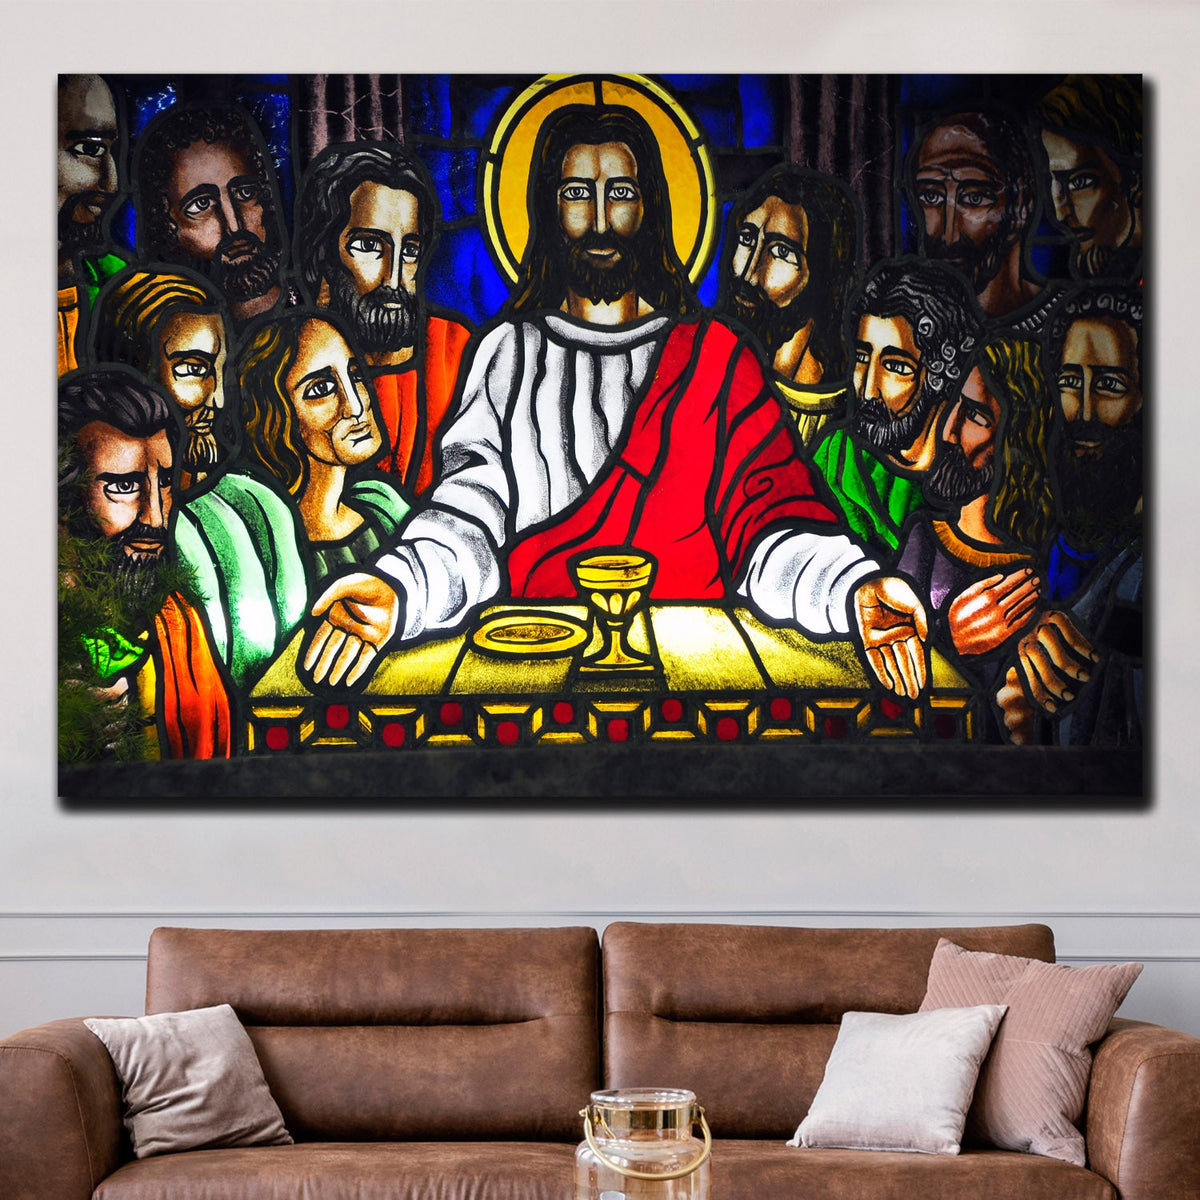 https://cdn.shopify.com/s/files/1/0387/9986/8044/products/TheLastSupperMosaicCanvasArtprintStretched-3.jpg